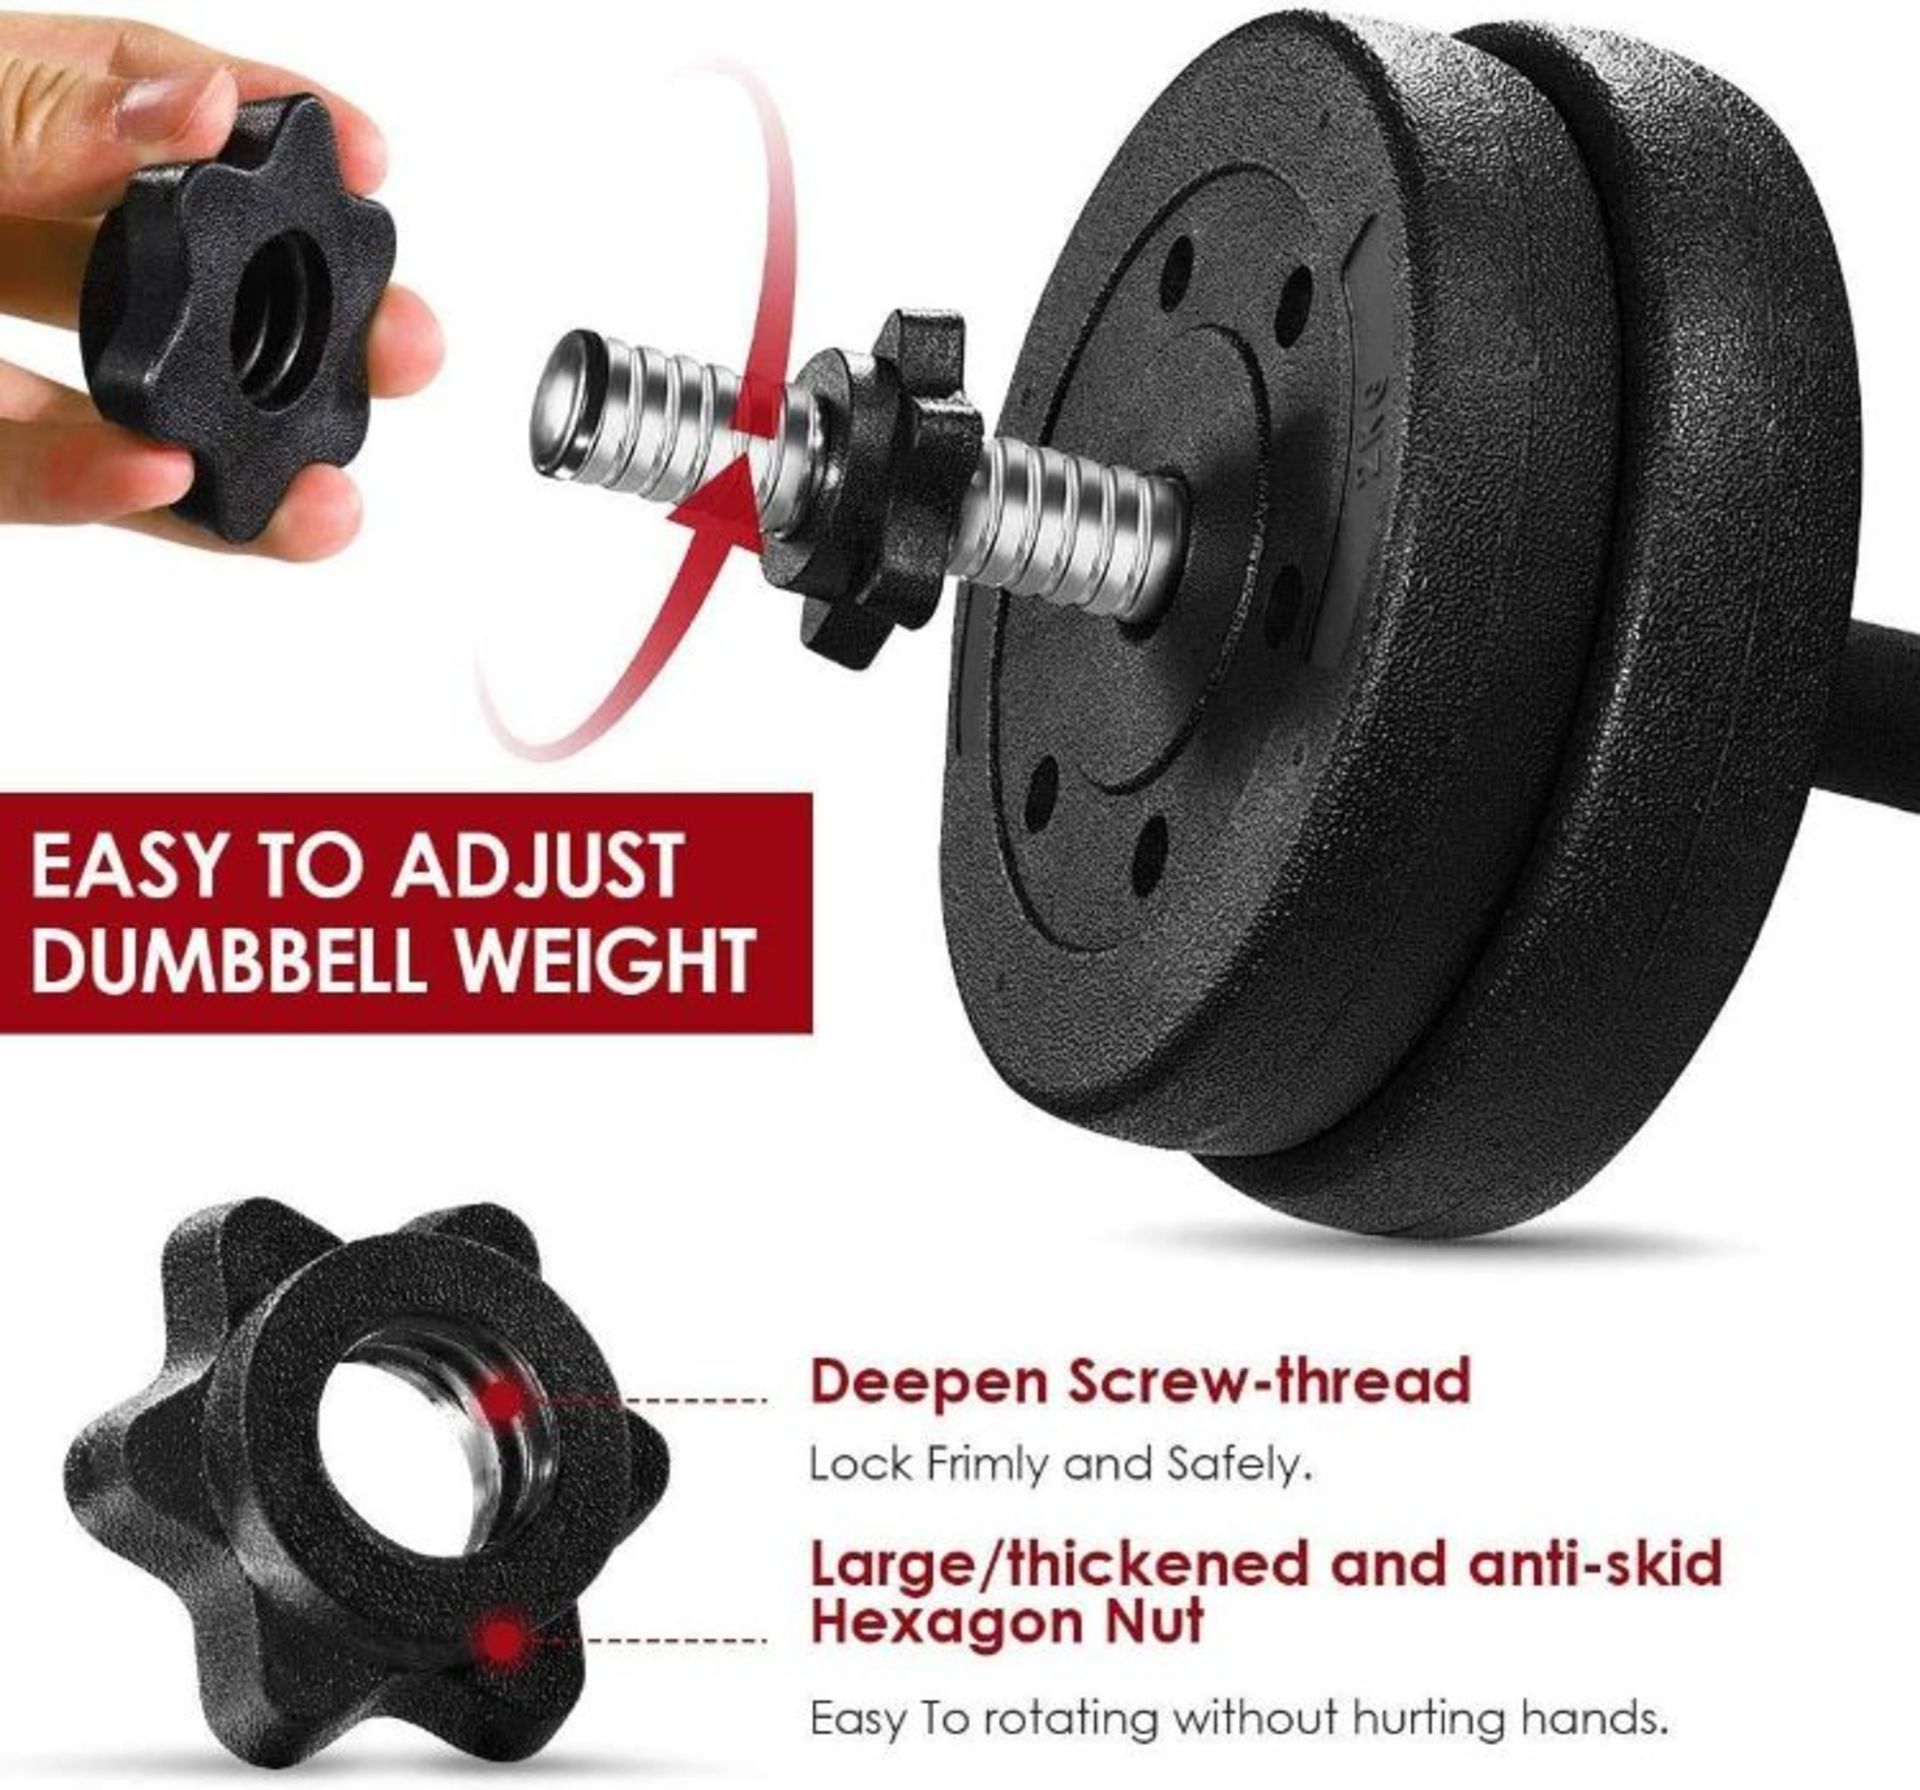 10x Movtotop 30KG adjustable Dumb Bell weight set, new and boxed, we can only find these in - Image 4 of 8